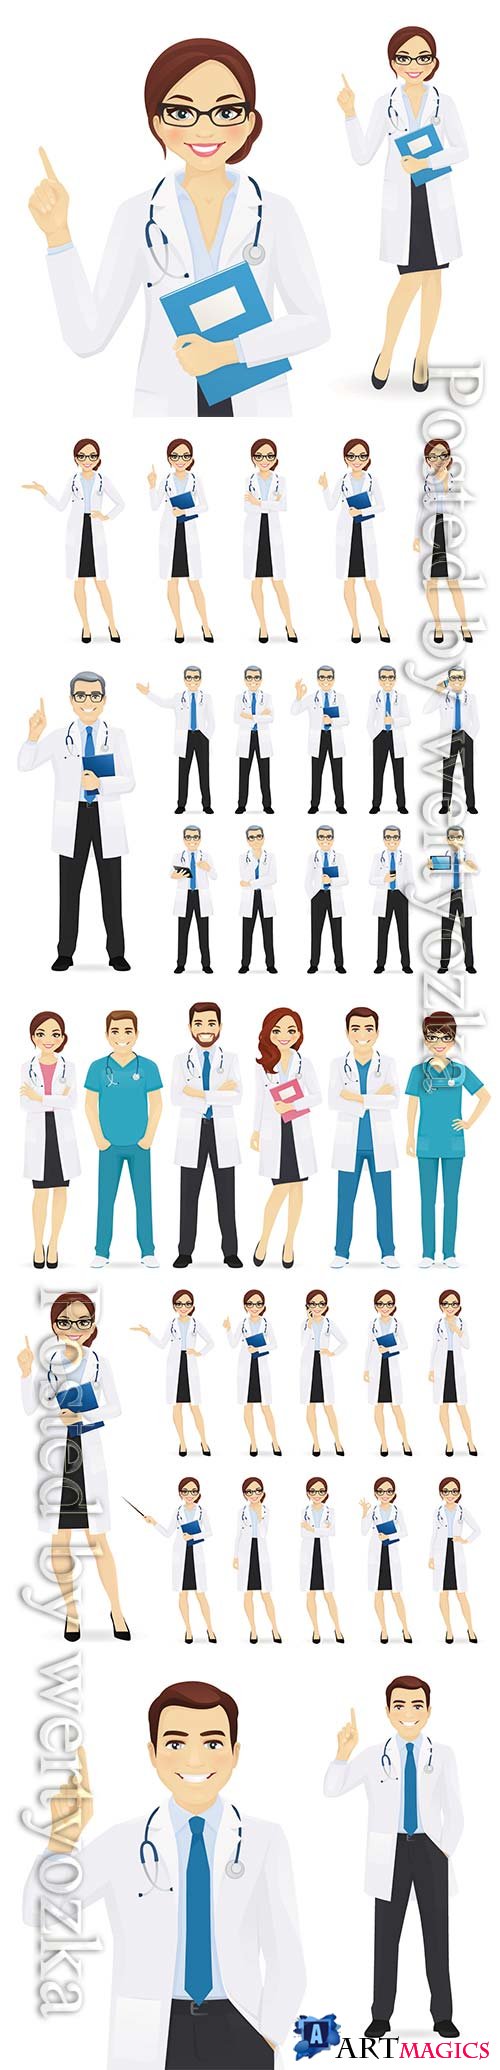 Doctors team in different poses set vector illustration